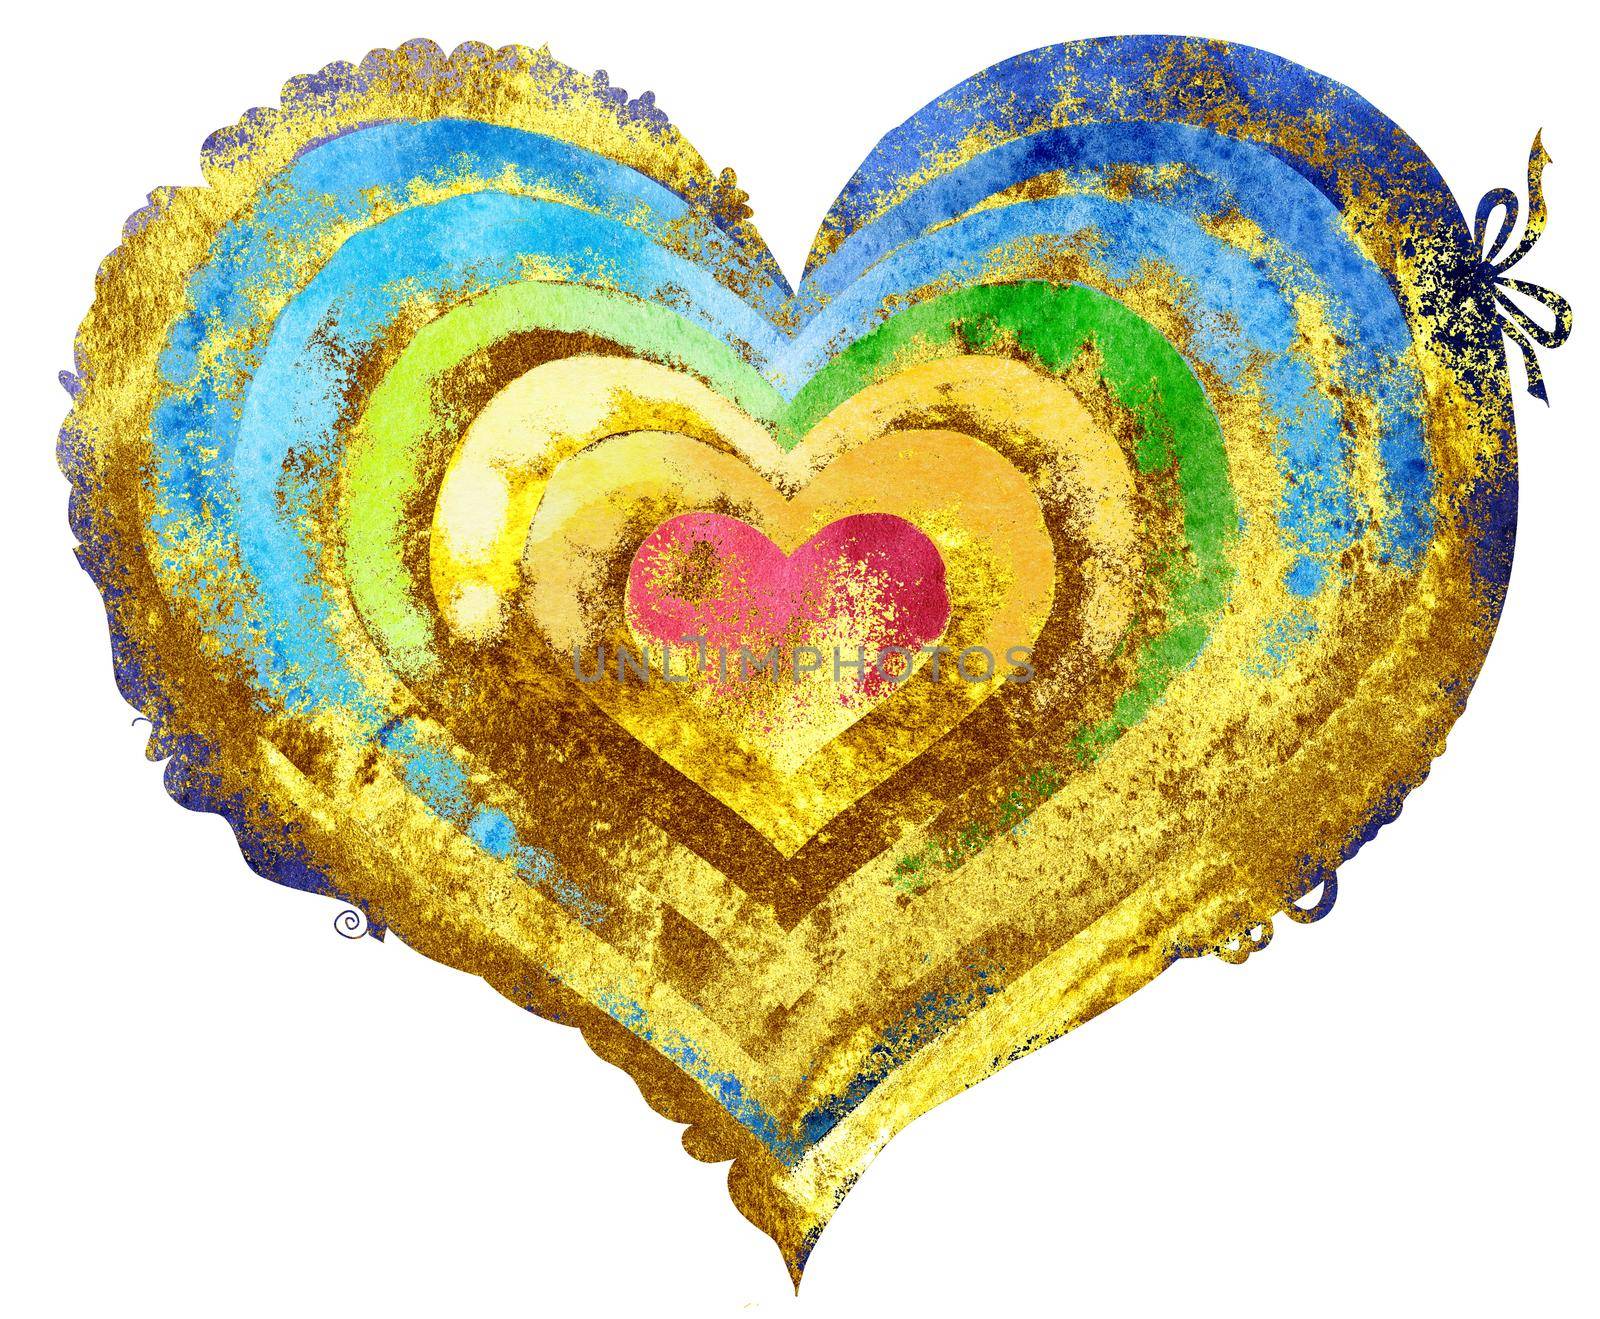 Watercolor textured rainbow heart with gold strokes by NataOmsk